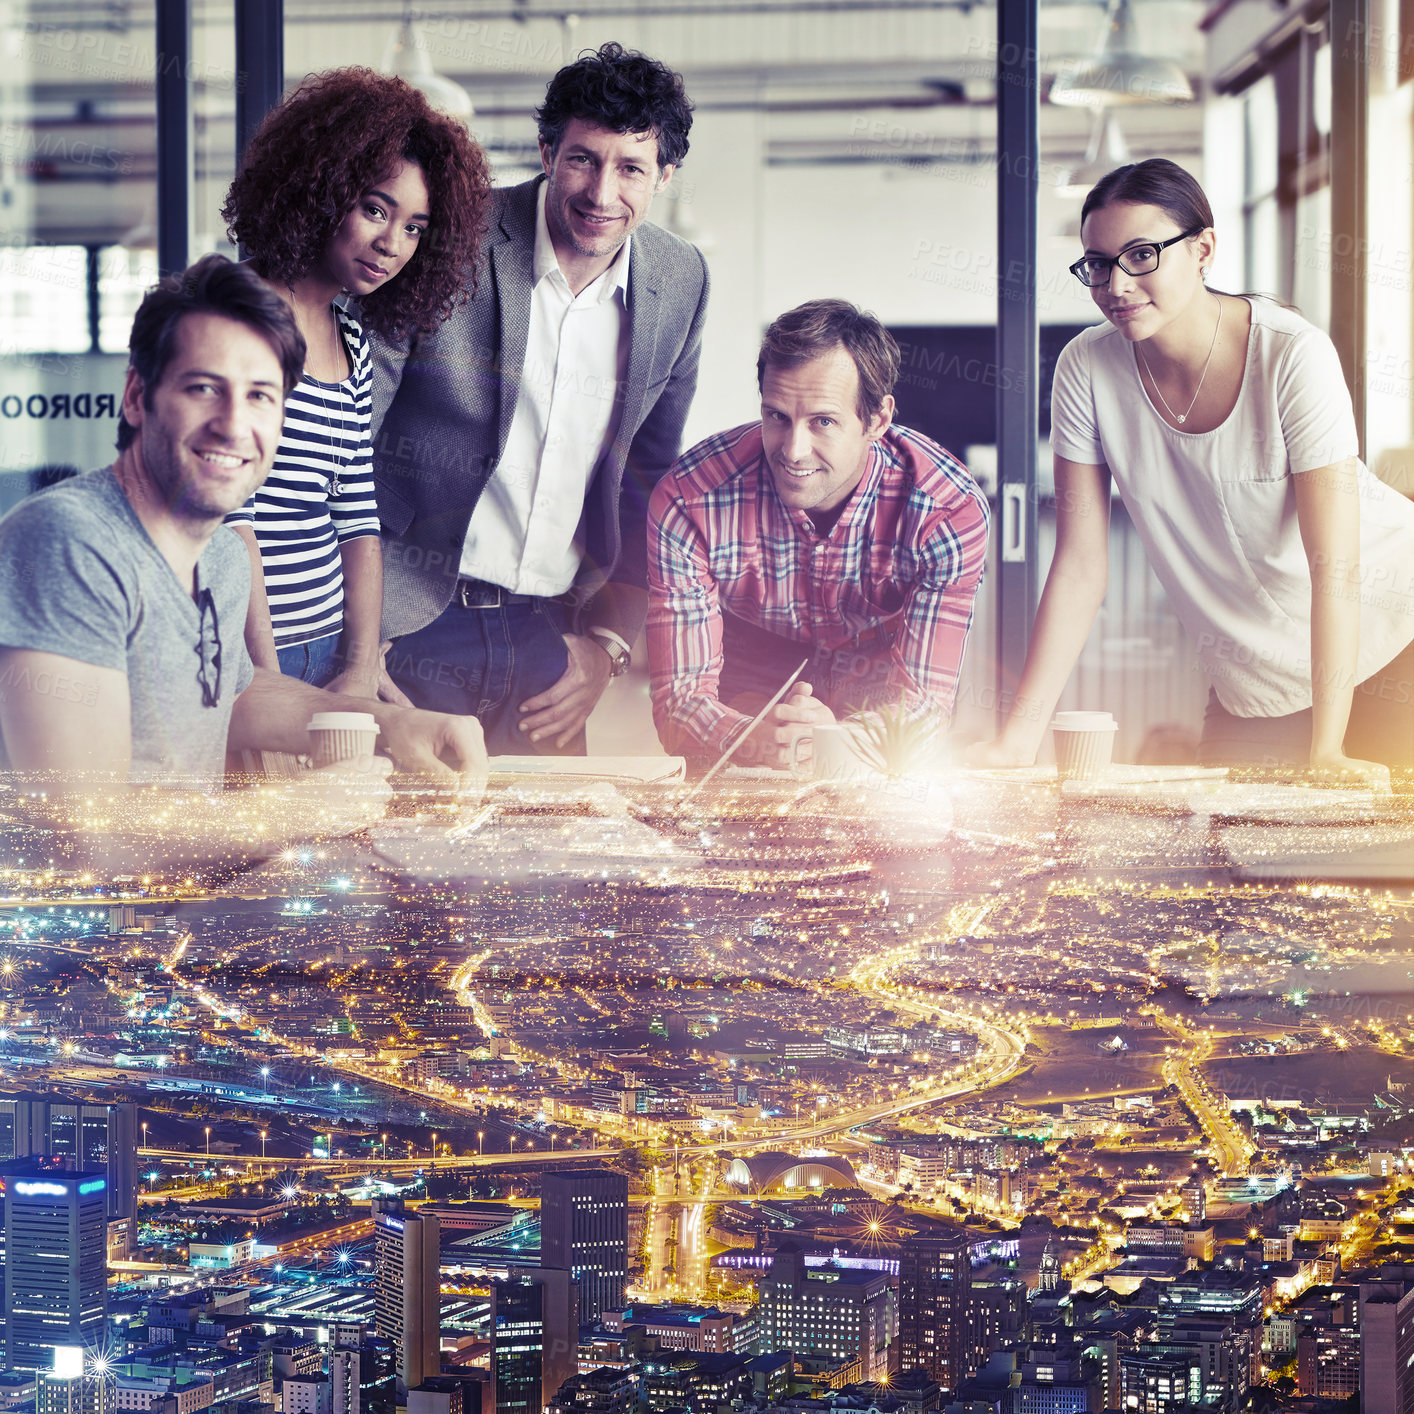 Buy stock photo Multiple exposure shot of a group of coworkers superimposed over a city background